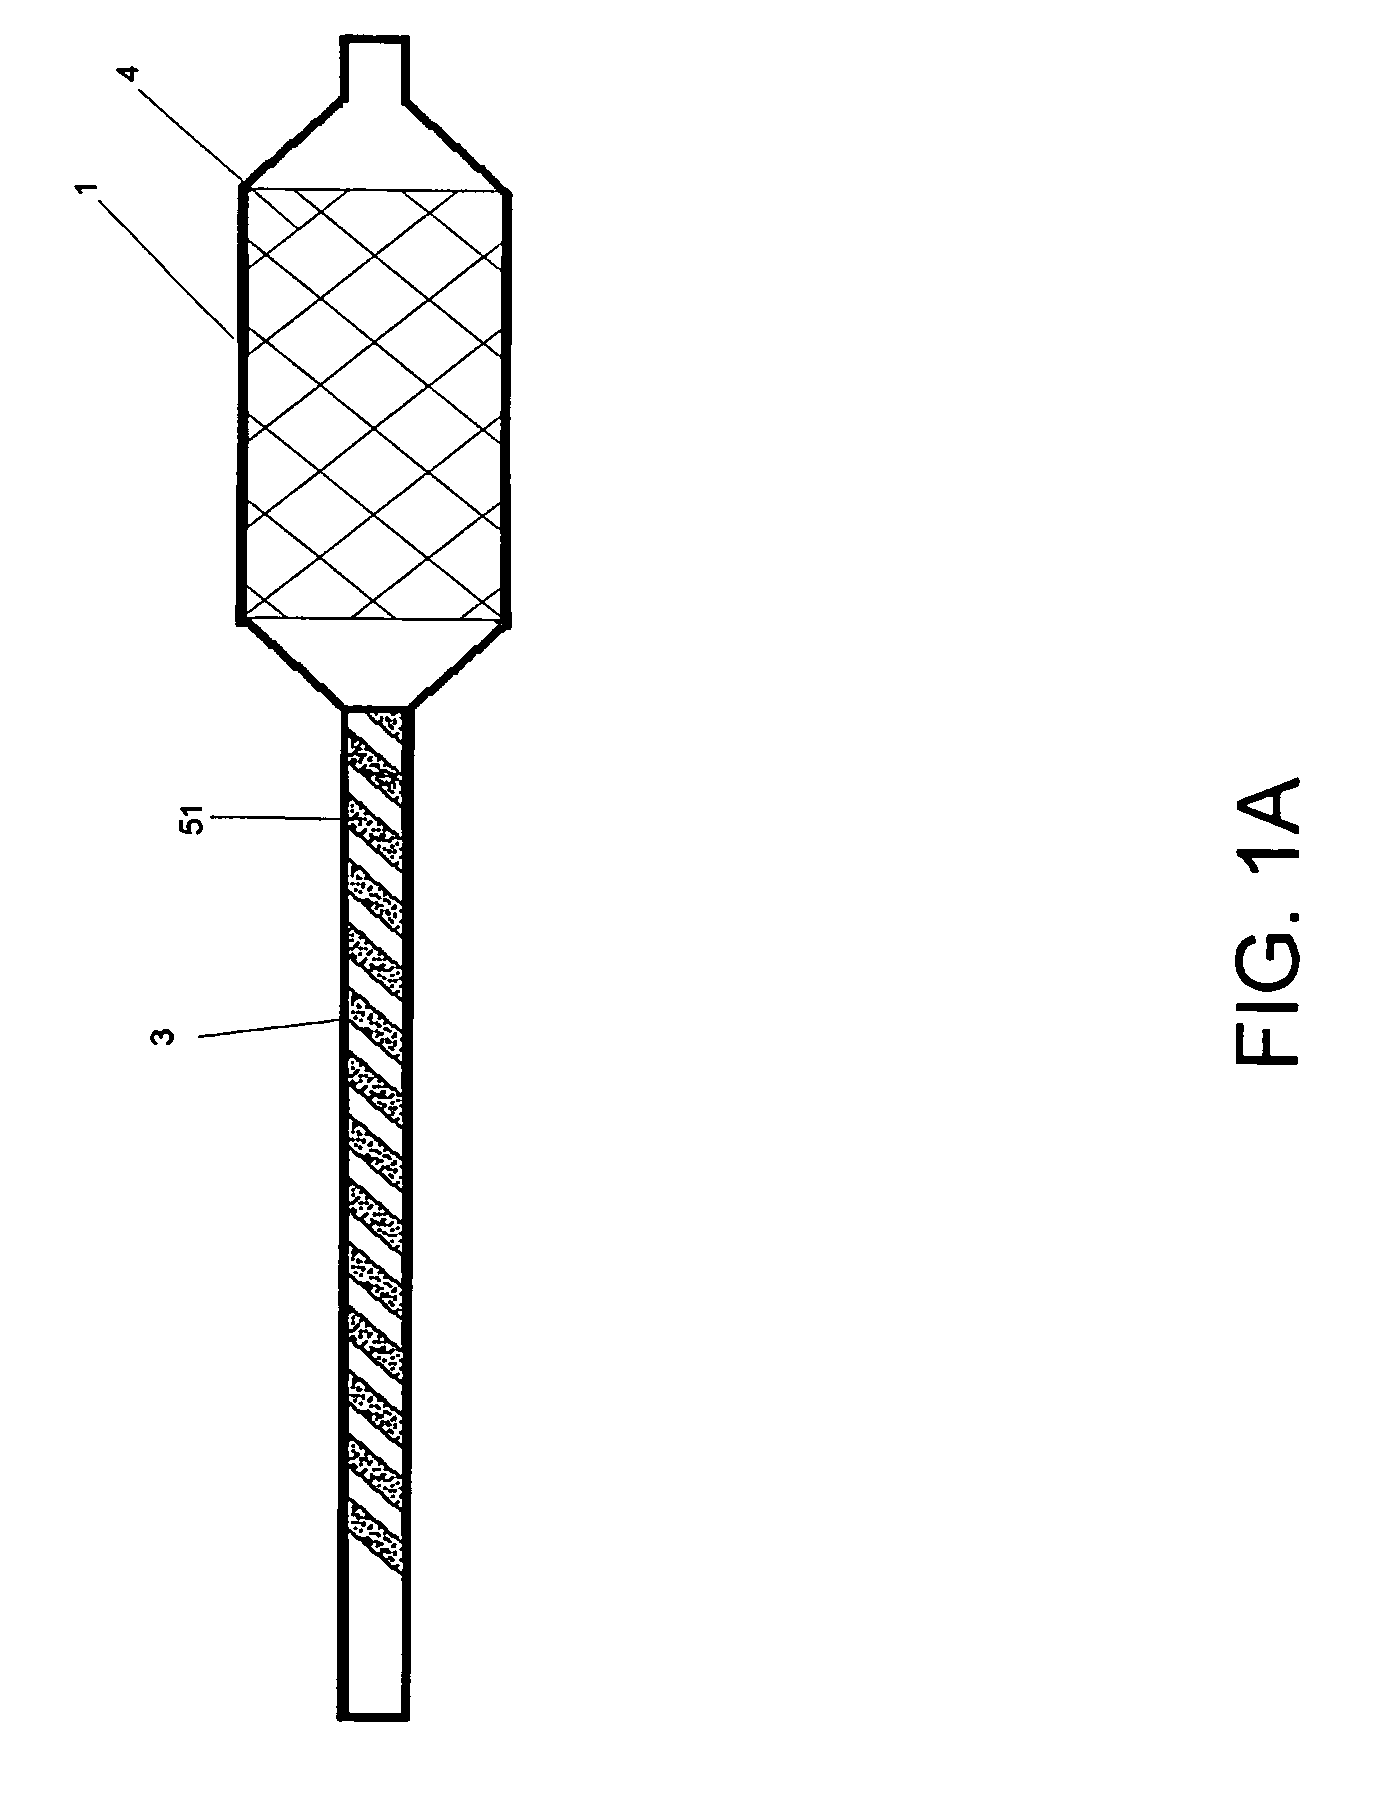 Adjustable bifurcation catheter incorporating electroactive polymer and methods of making and using the same